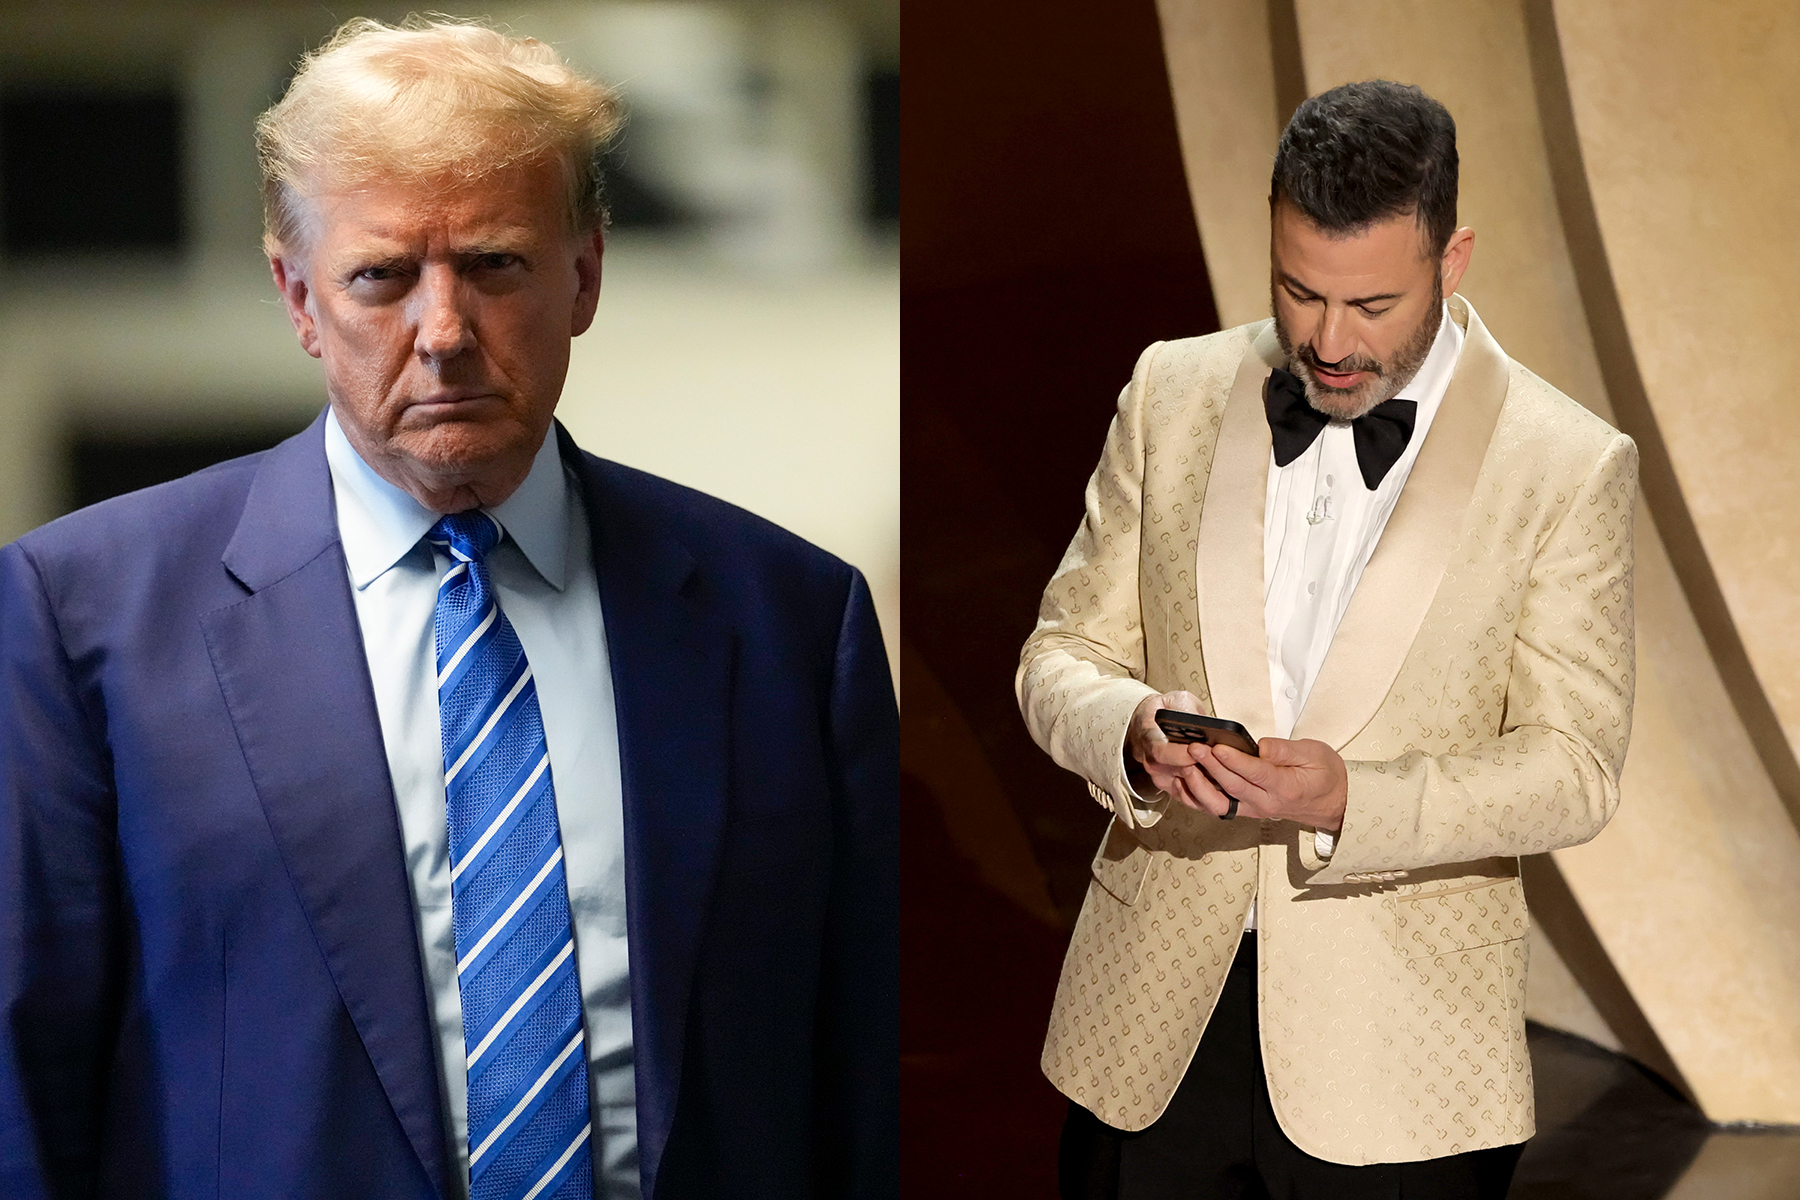 Trump Takes Trial Break to Rant About Kimmel’s Month-Old Oscars Performance